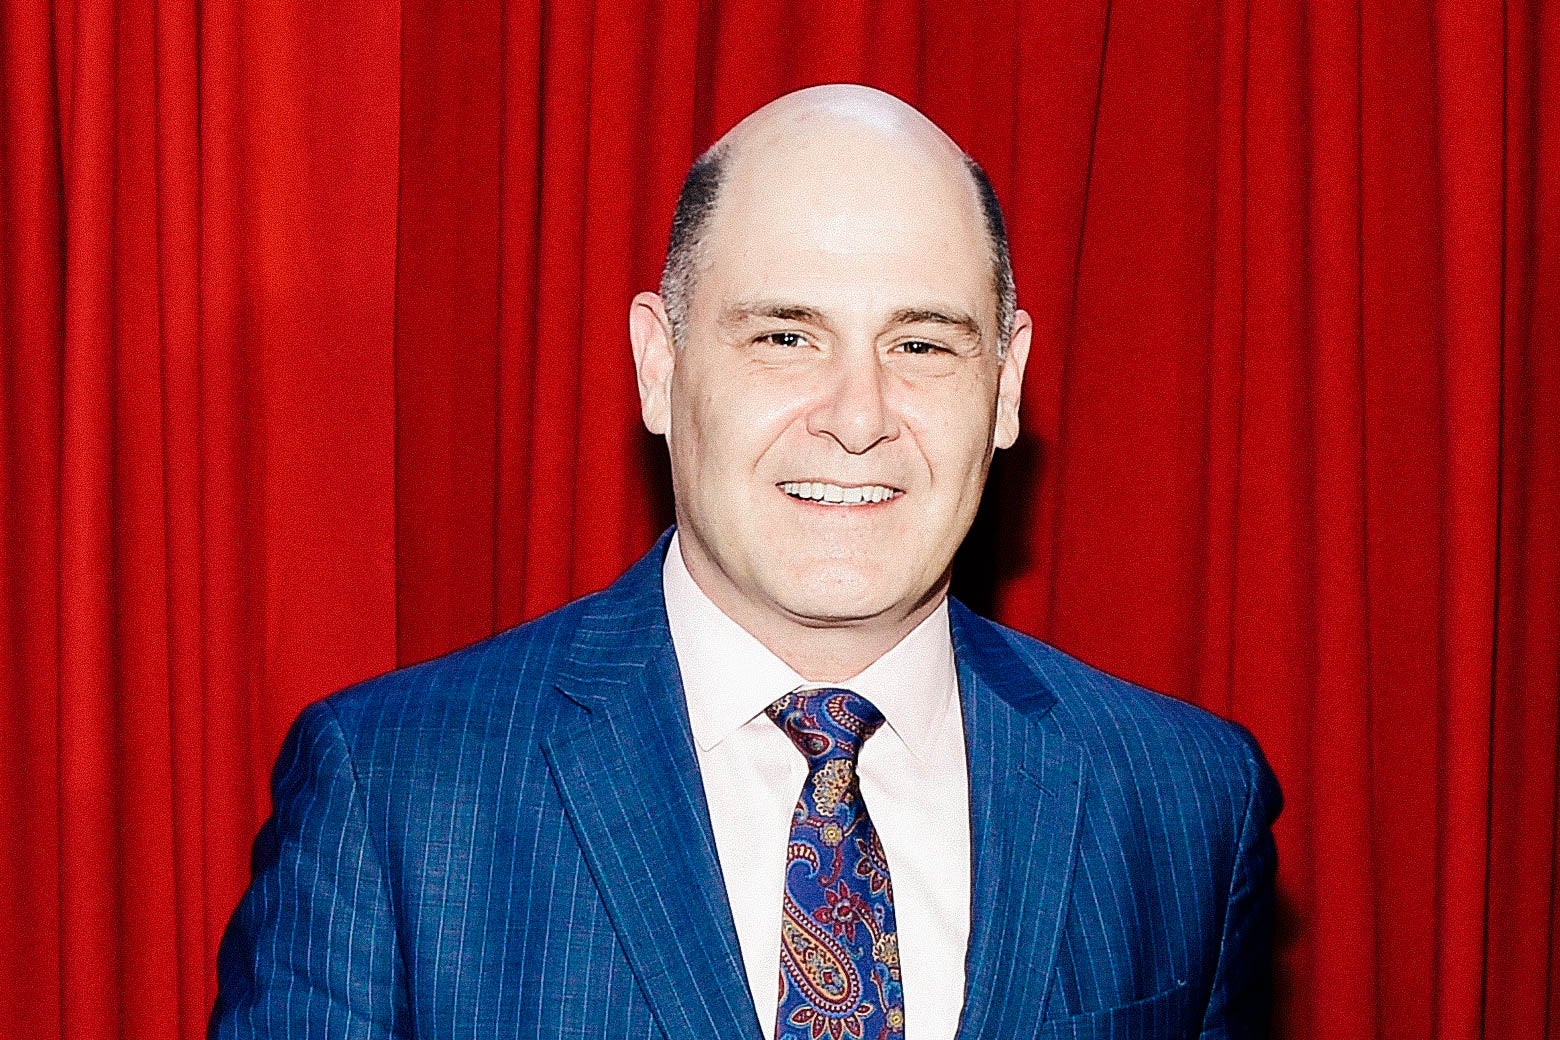 Matthew Weiner poses in front of a red curtain.